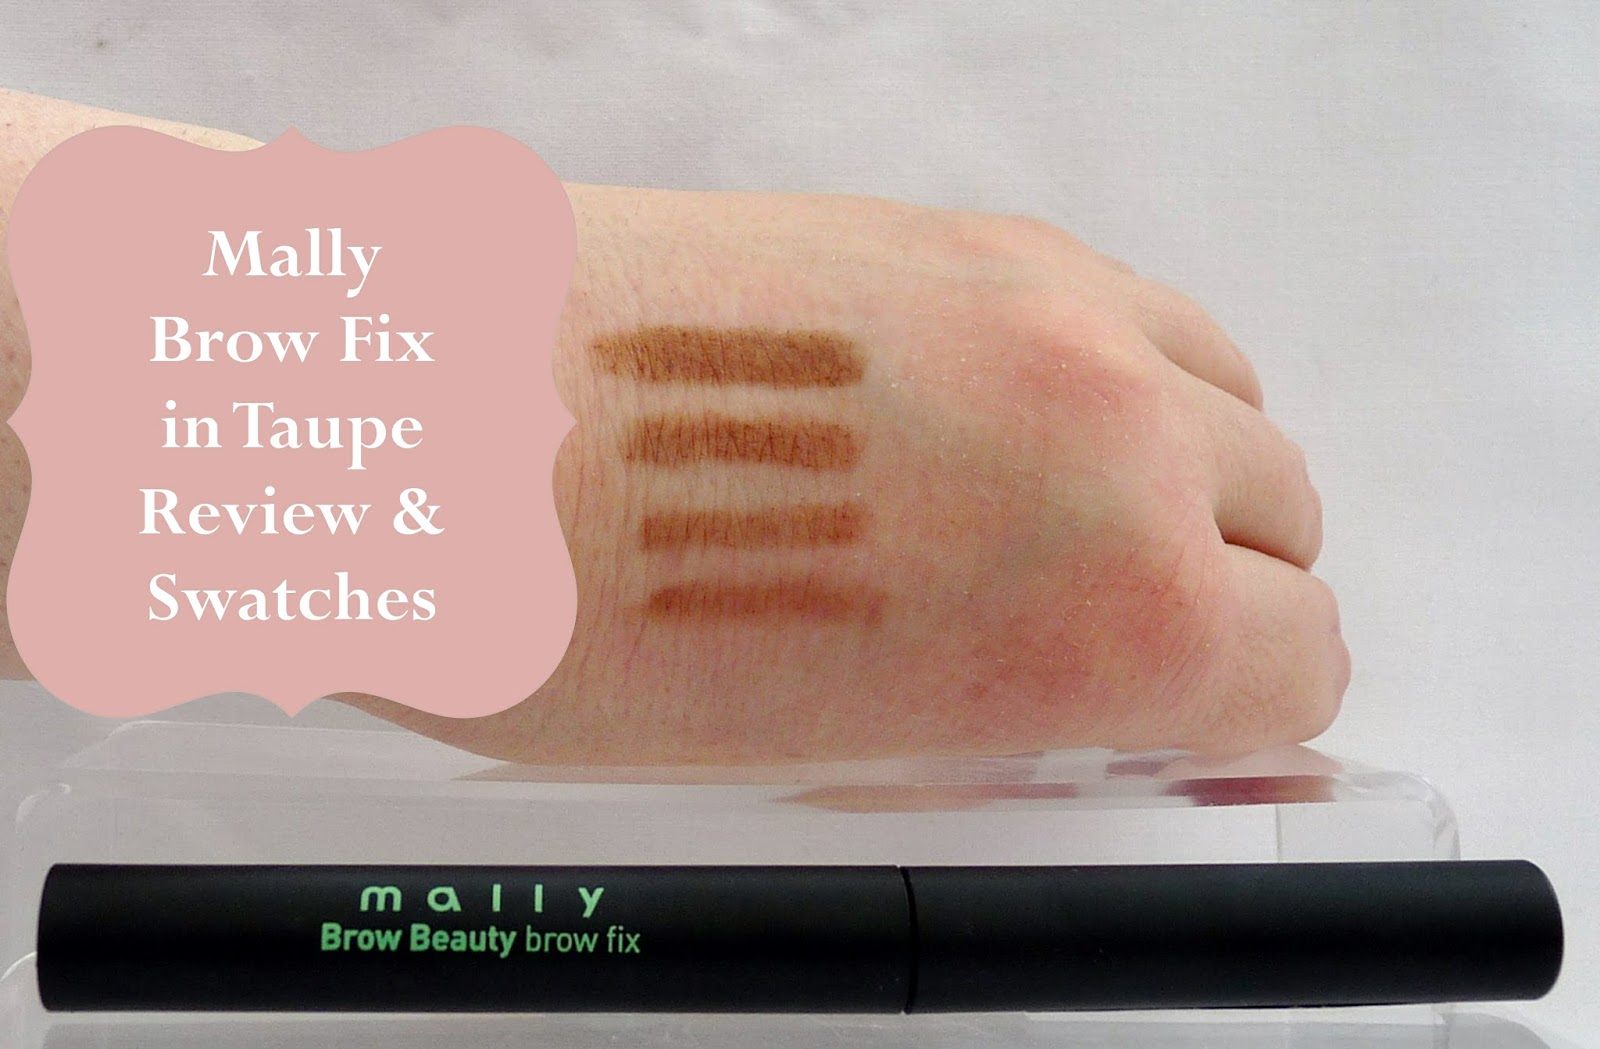 Mally Brow Fix Taupe Review & Swatches